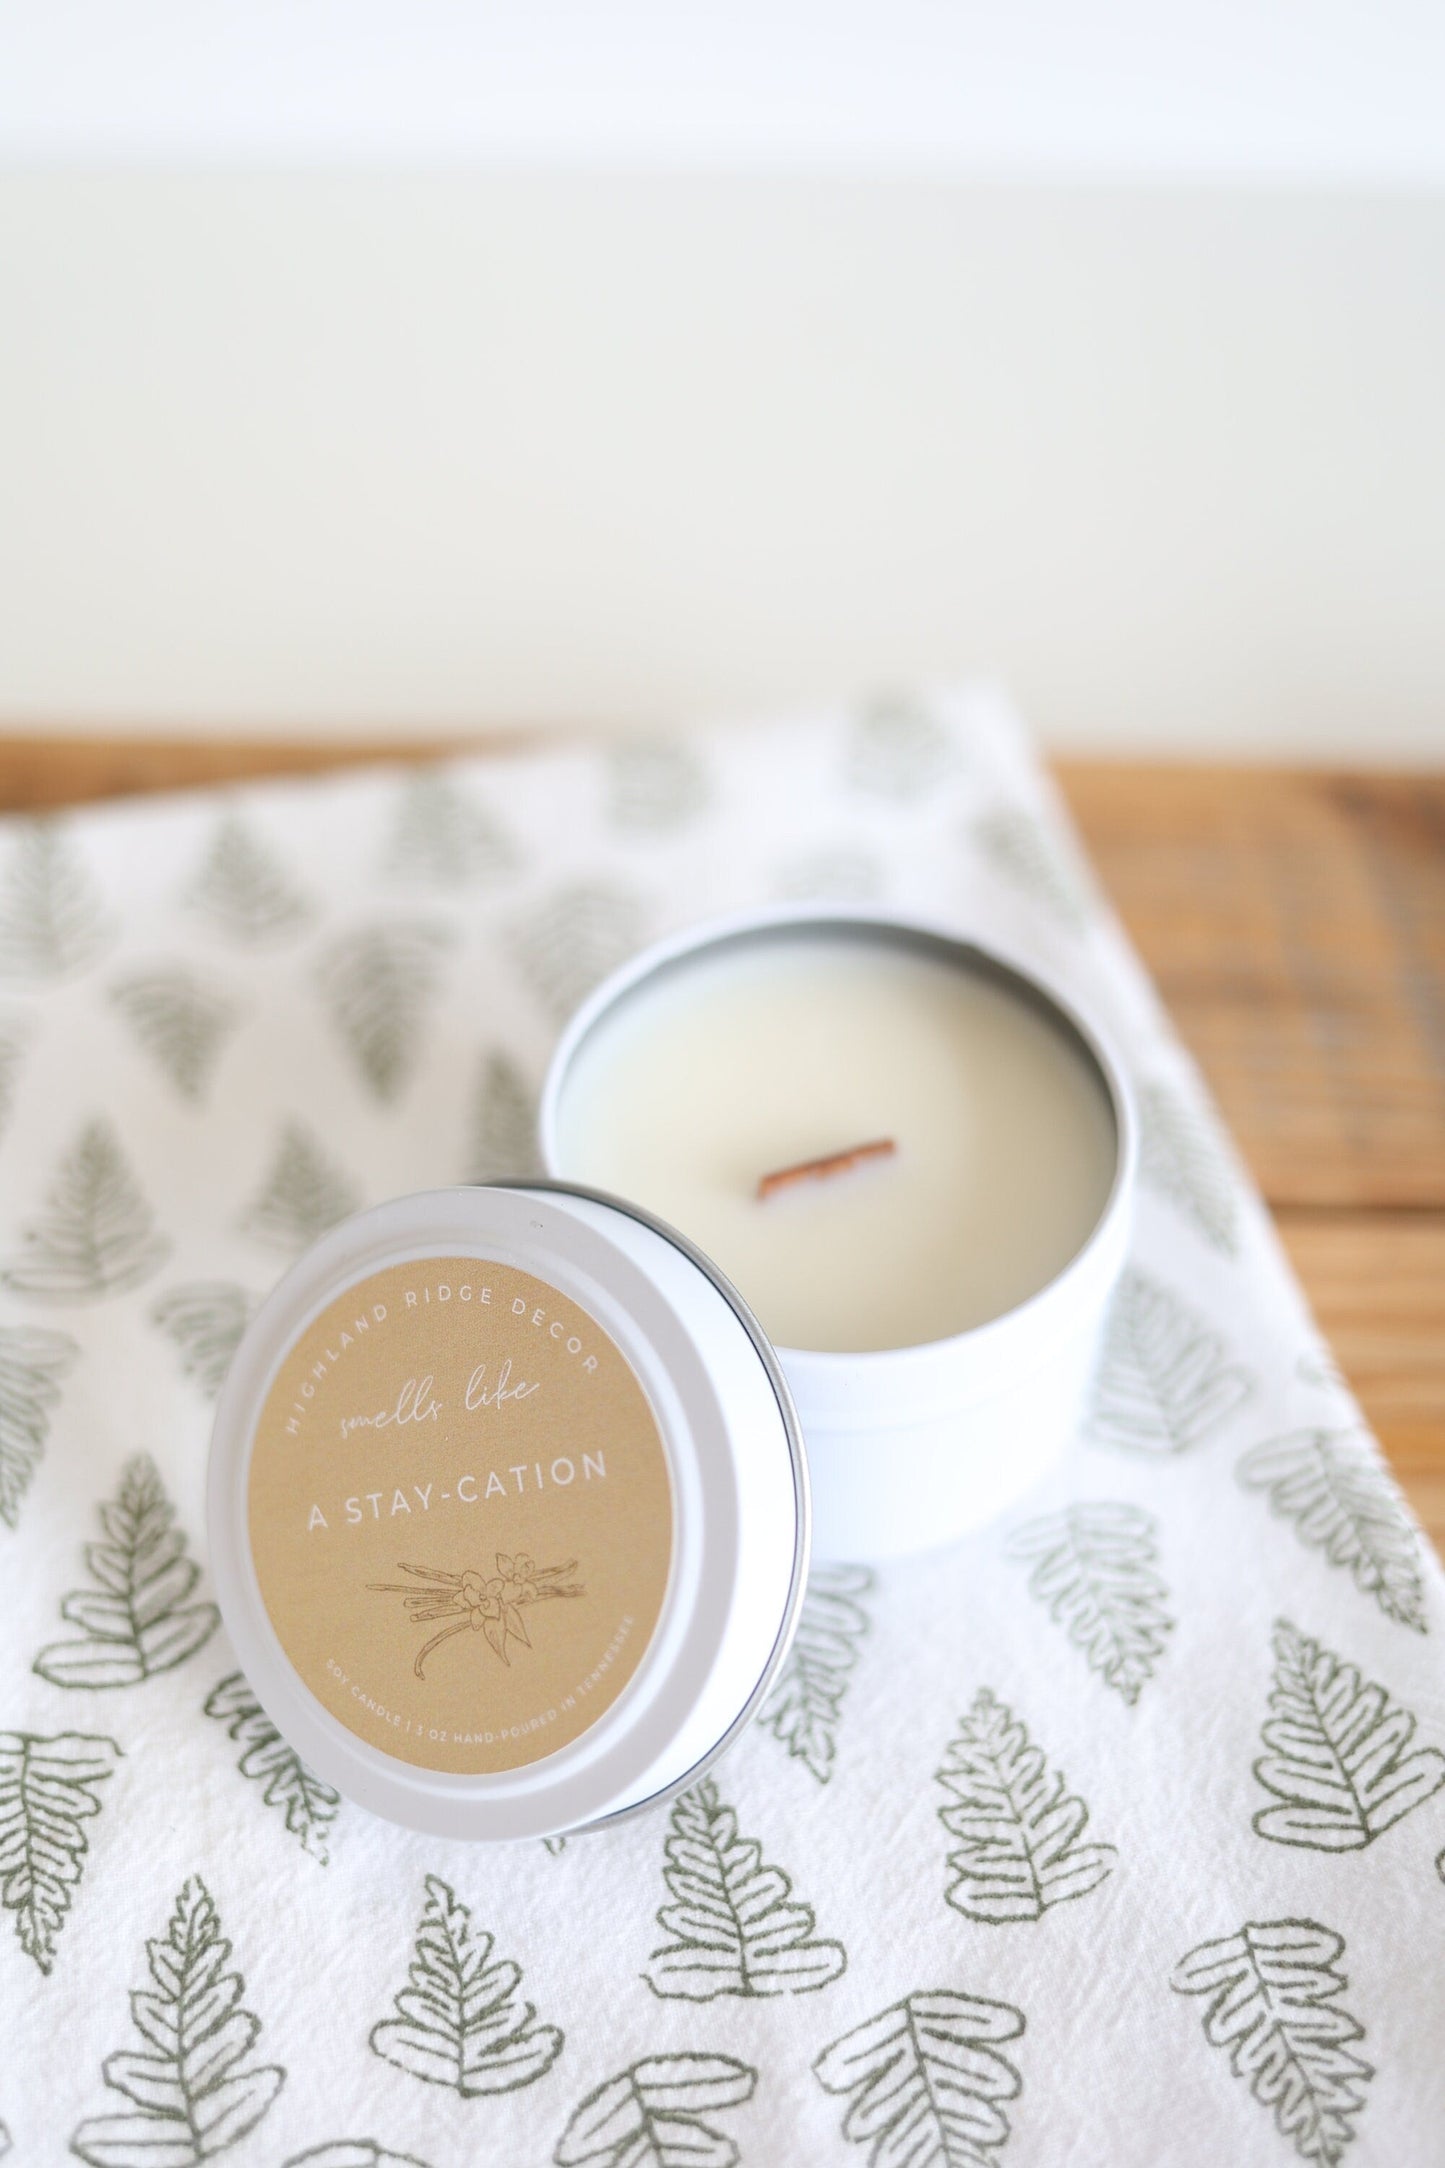 "A Stay-cation" Candle Tin.